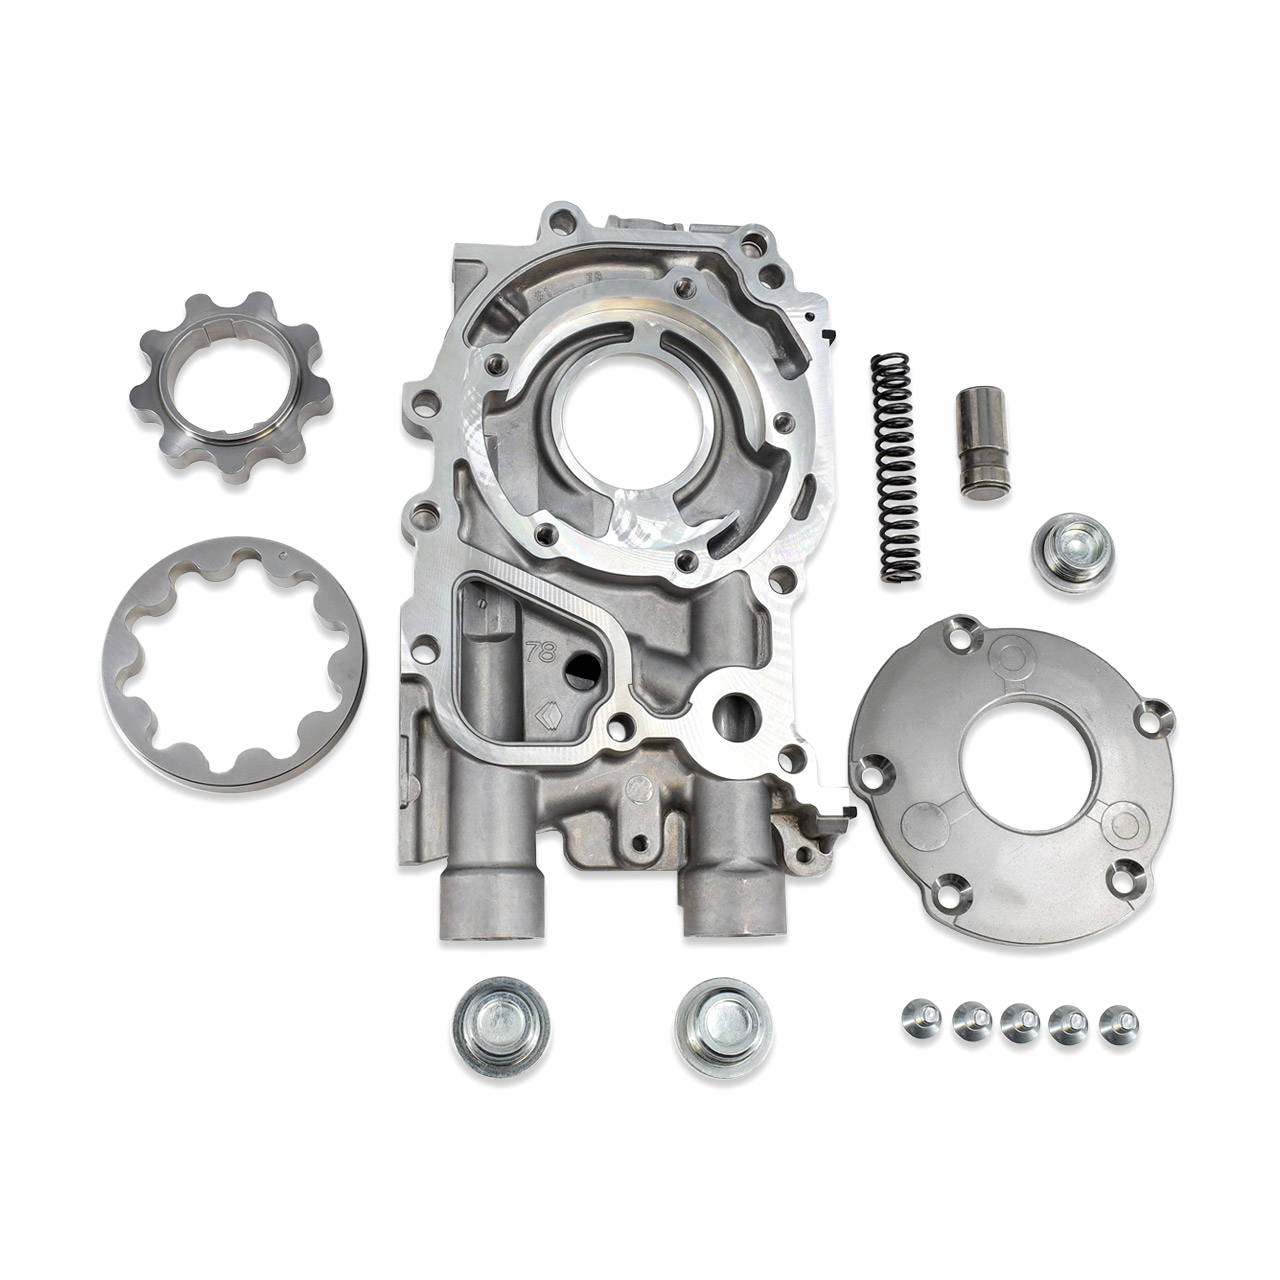 IAG Performance Stage 1 Blueprinted EJ25 11mm Oil Pump Parts